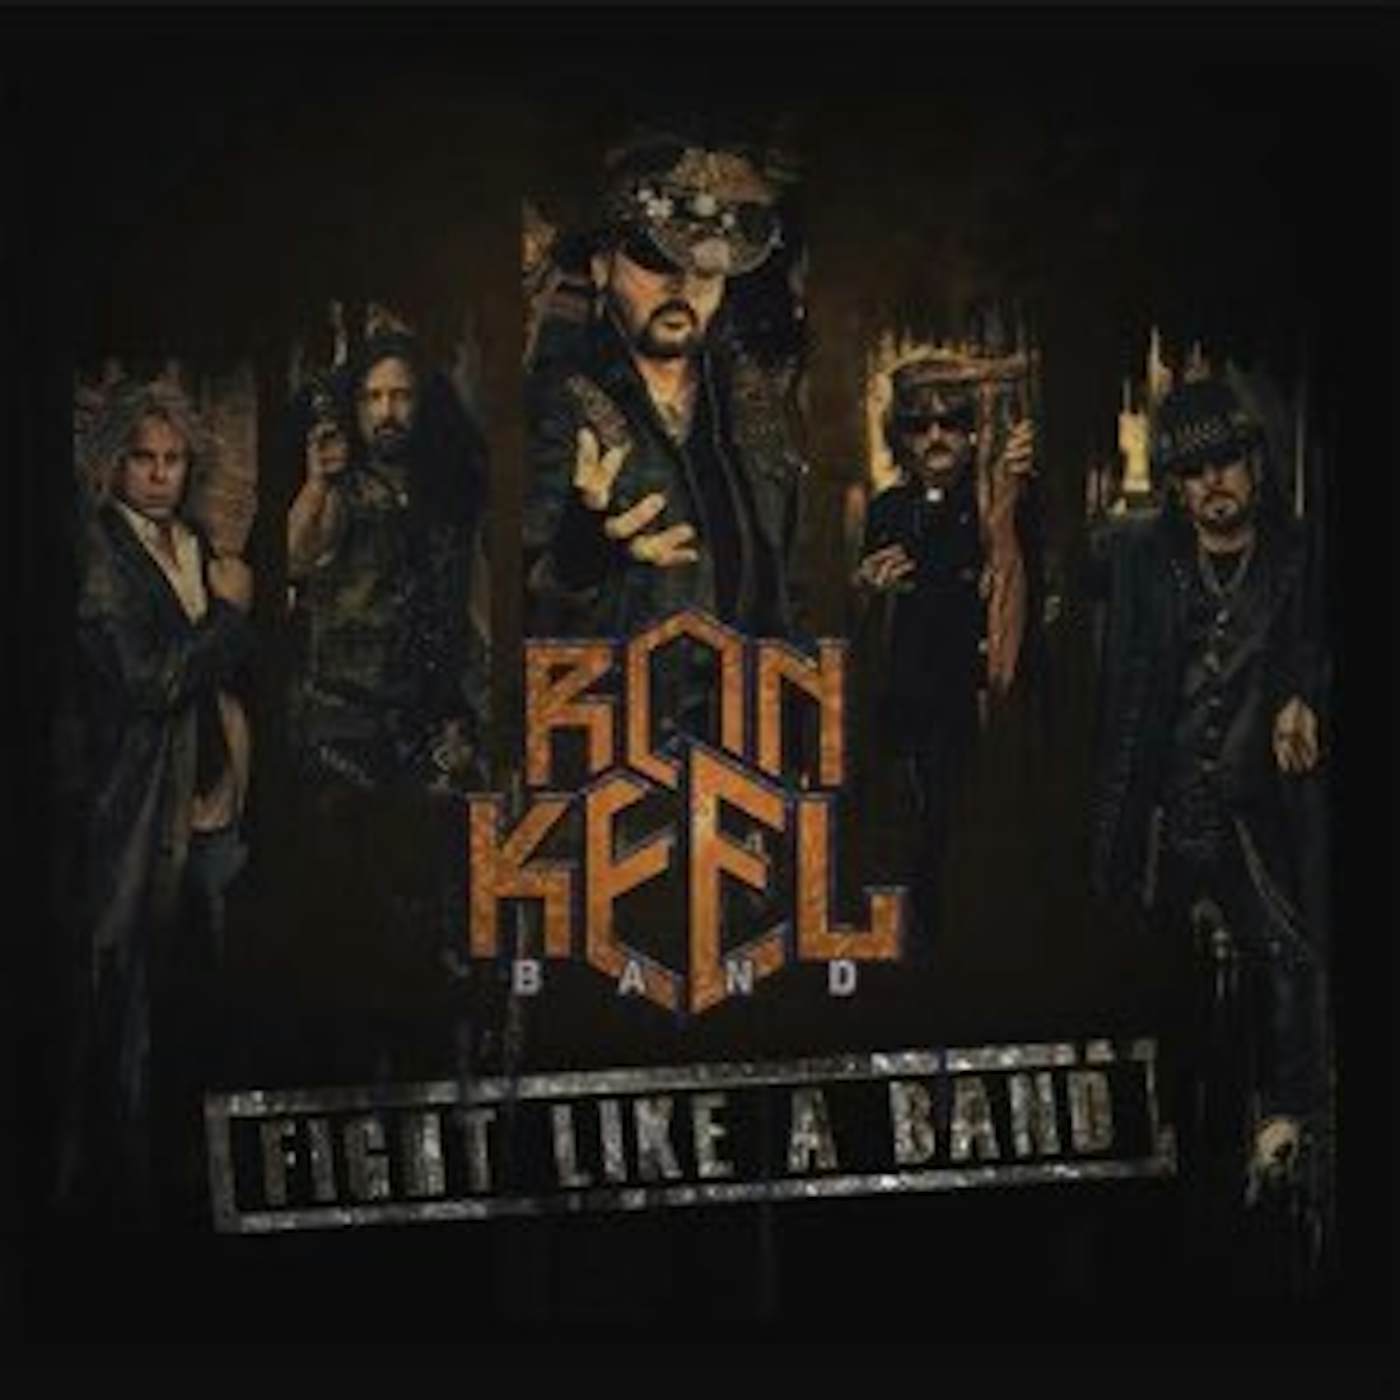 Ron Keel Fight Like A Band Vinyl Record